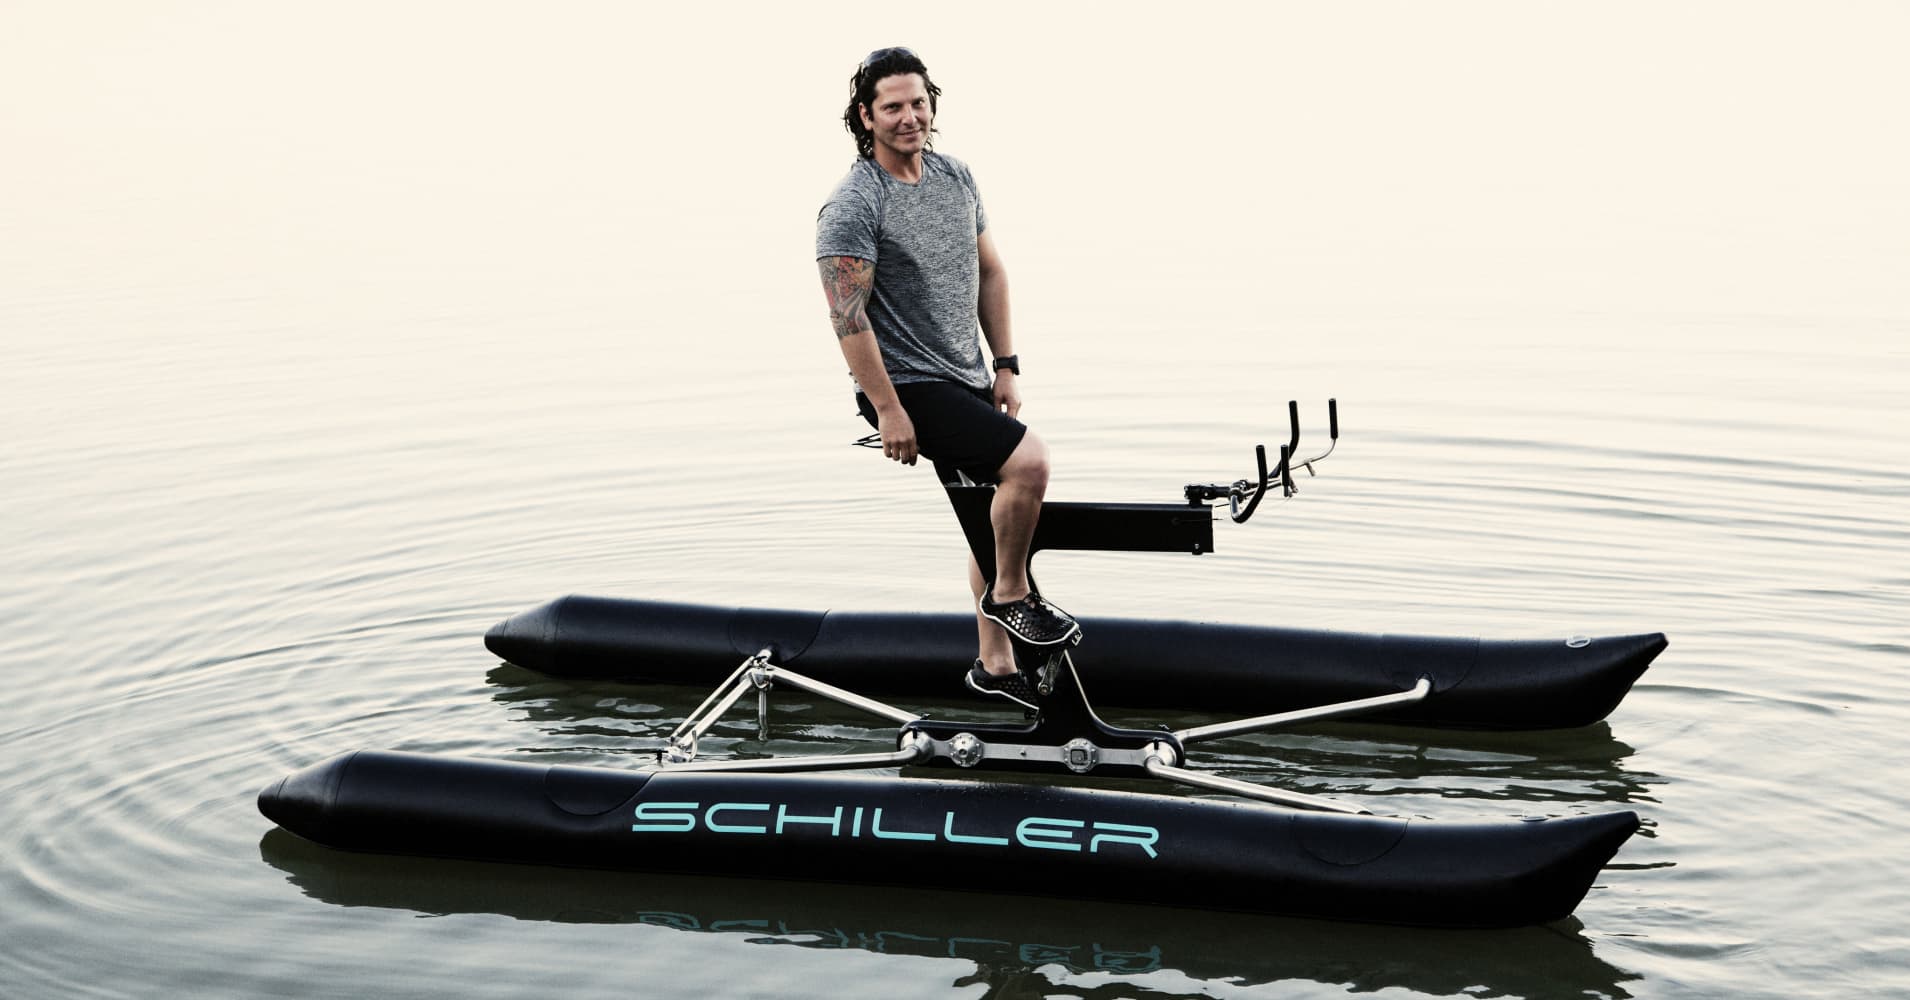 water bikes could make a ripple in exercise tech